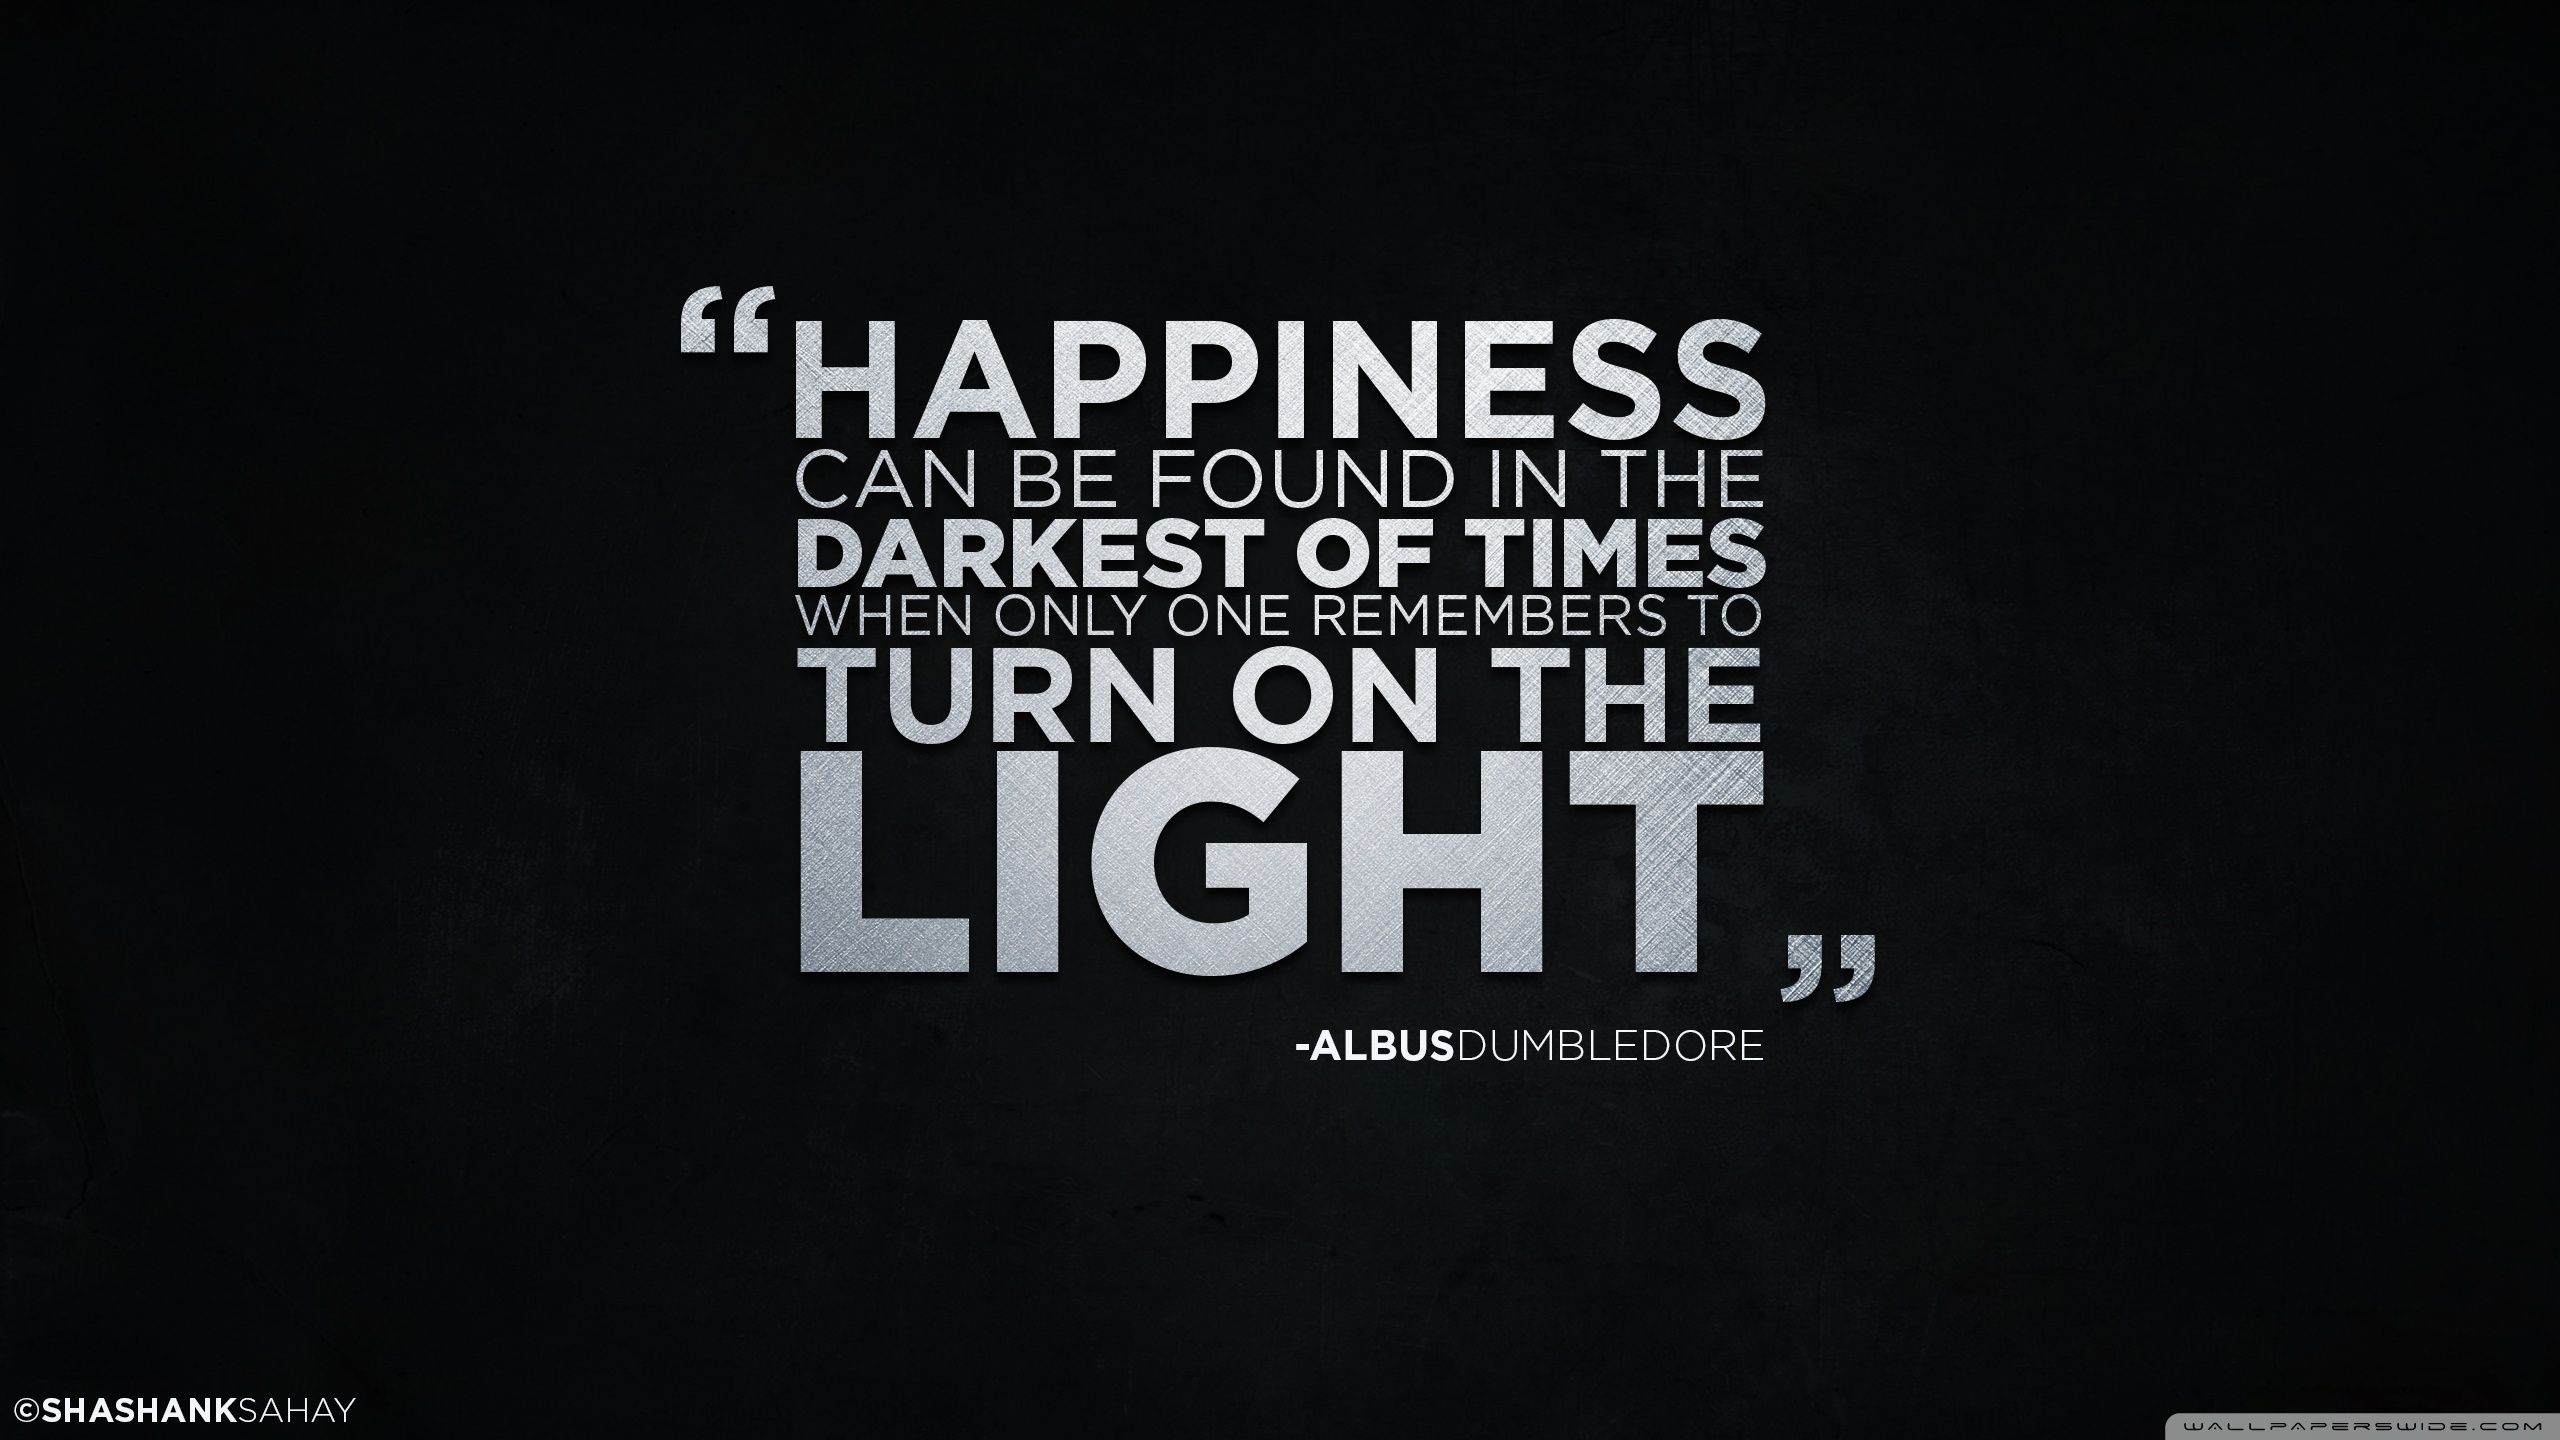 Quotes From Albus Dumbledore. QuotesGram. Harry potter quotes wallpaper, HD quotes, Inspirational quotes